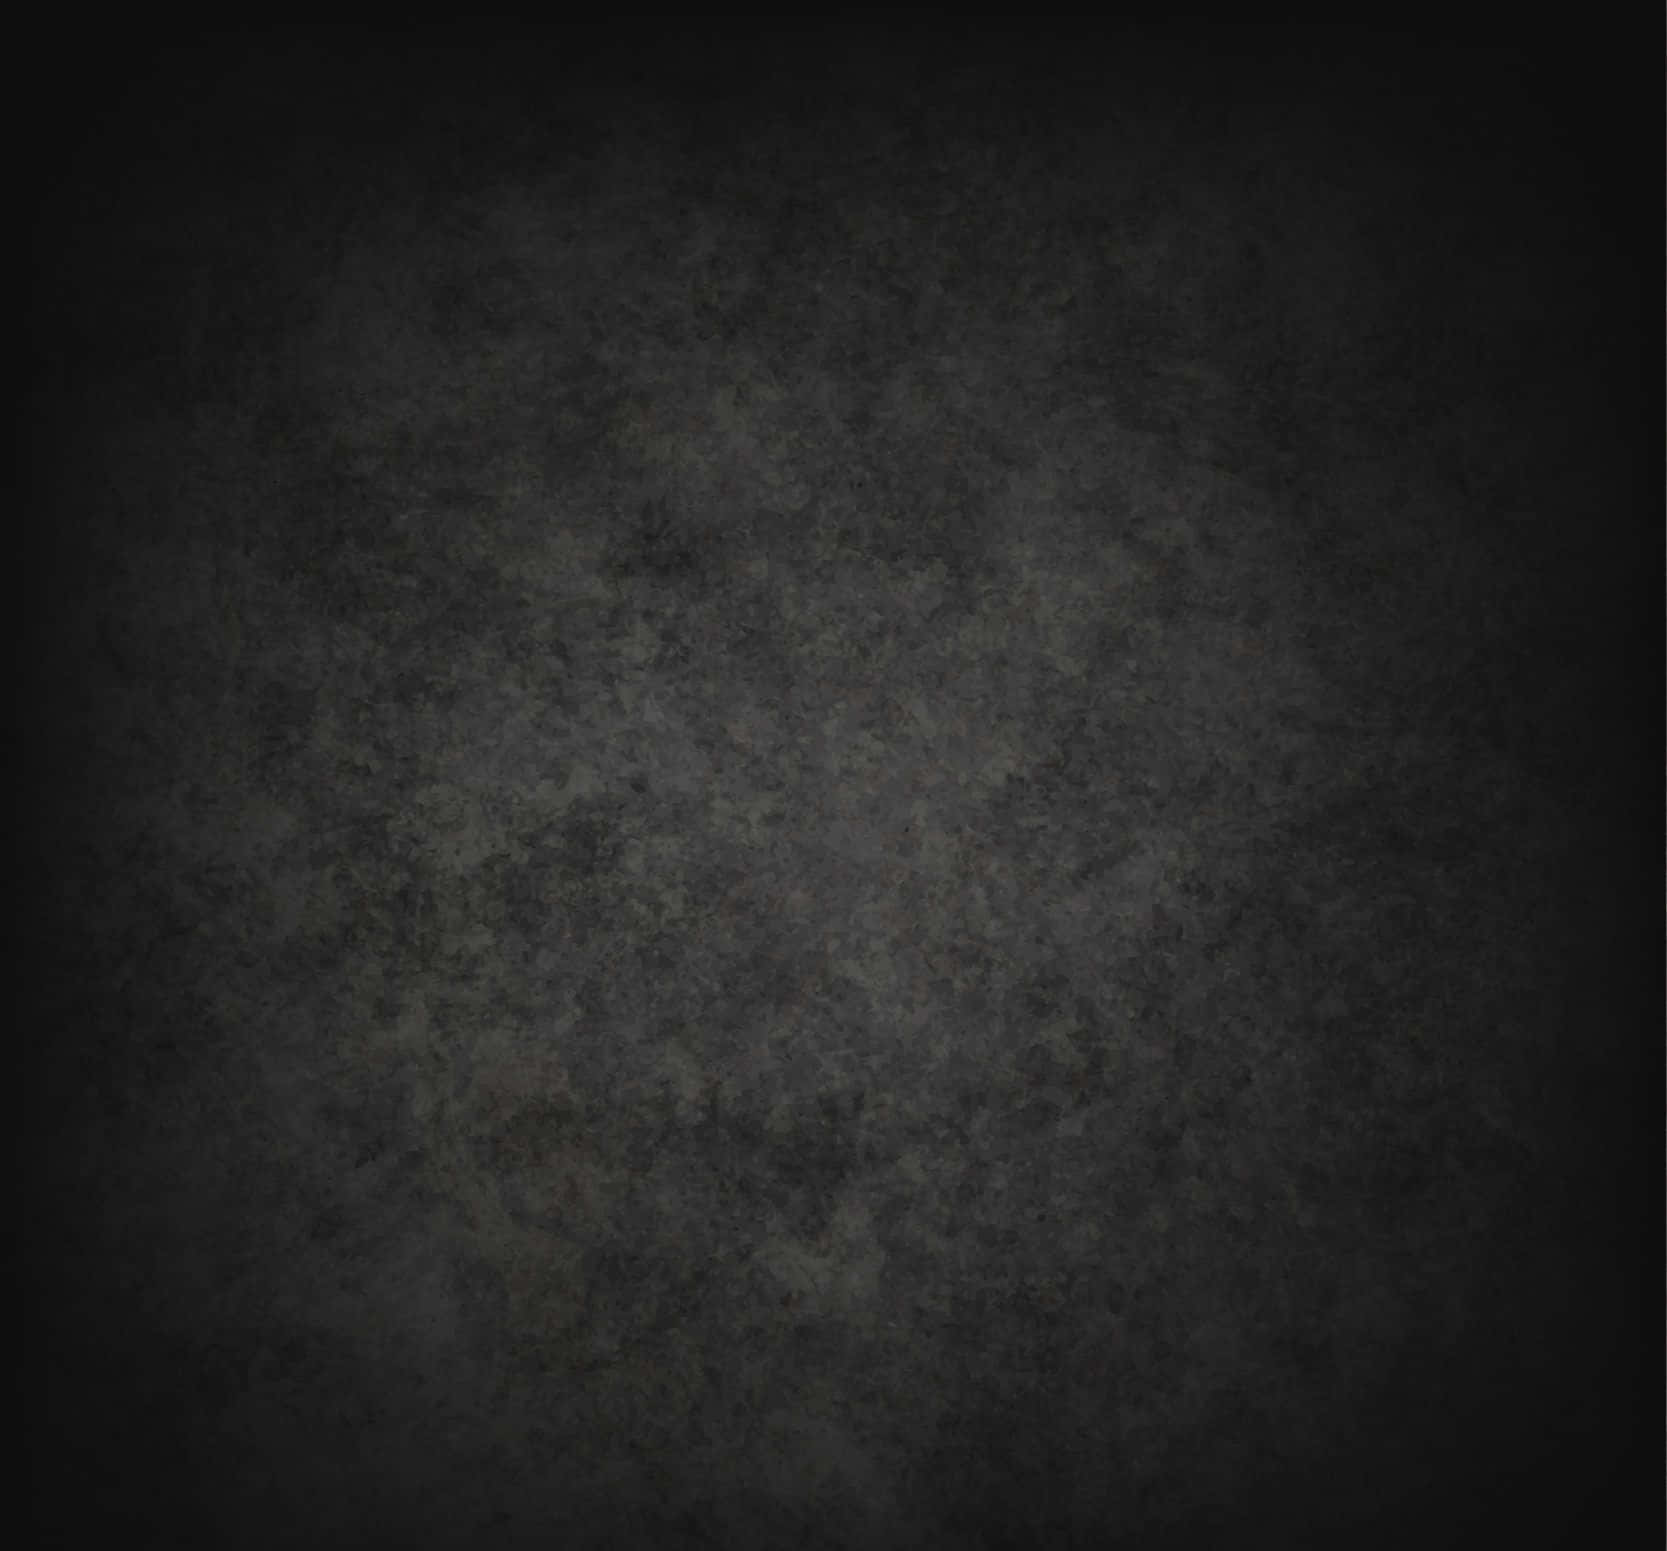 A Black Grunge Background With A Light Texture Wallpaper